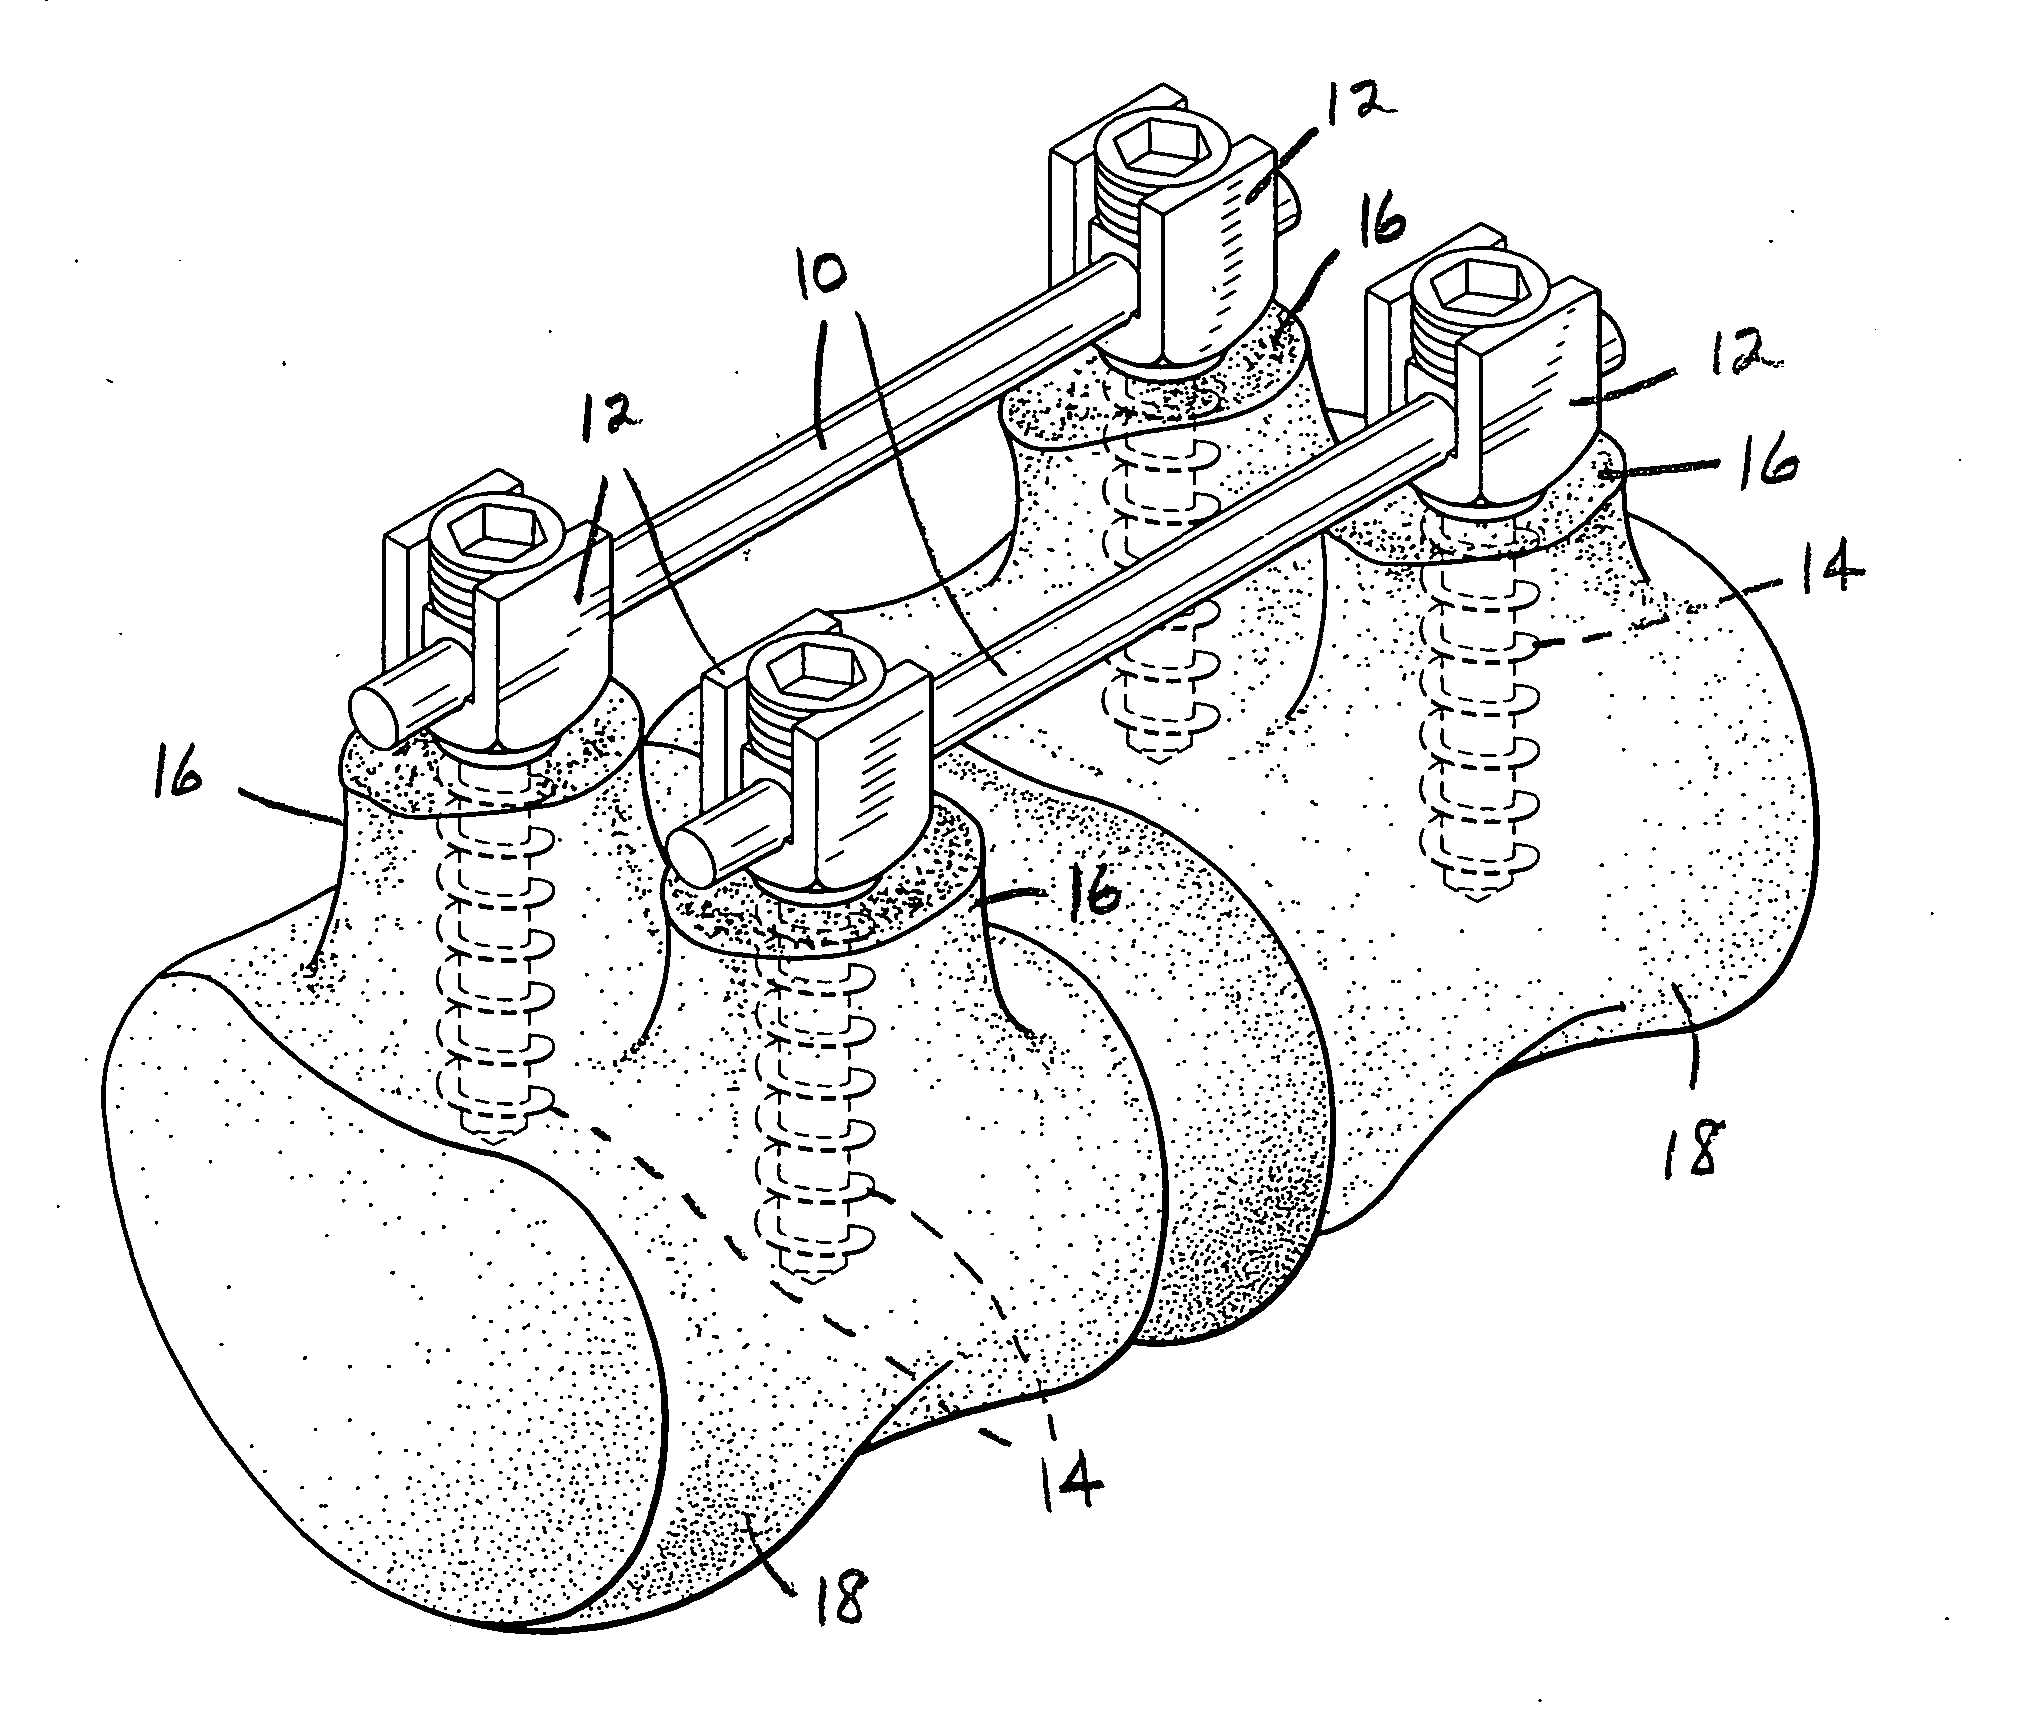 Apparatus and method for flexible spinal fixation